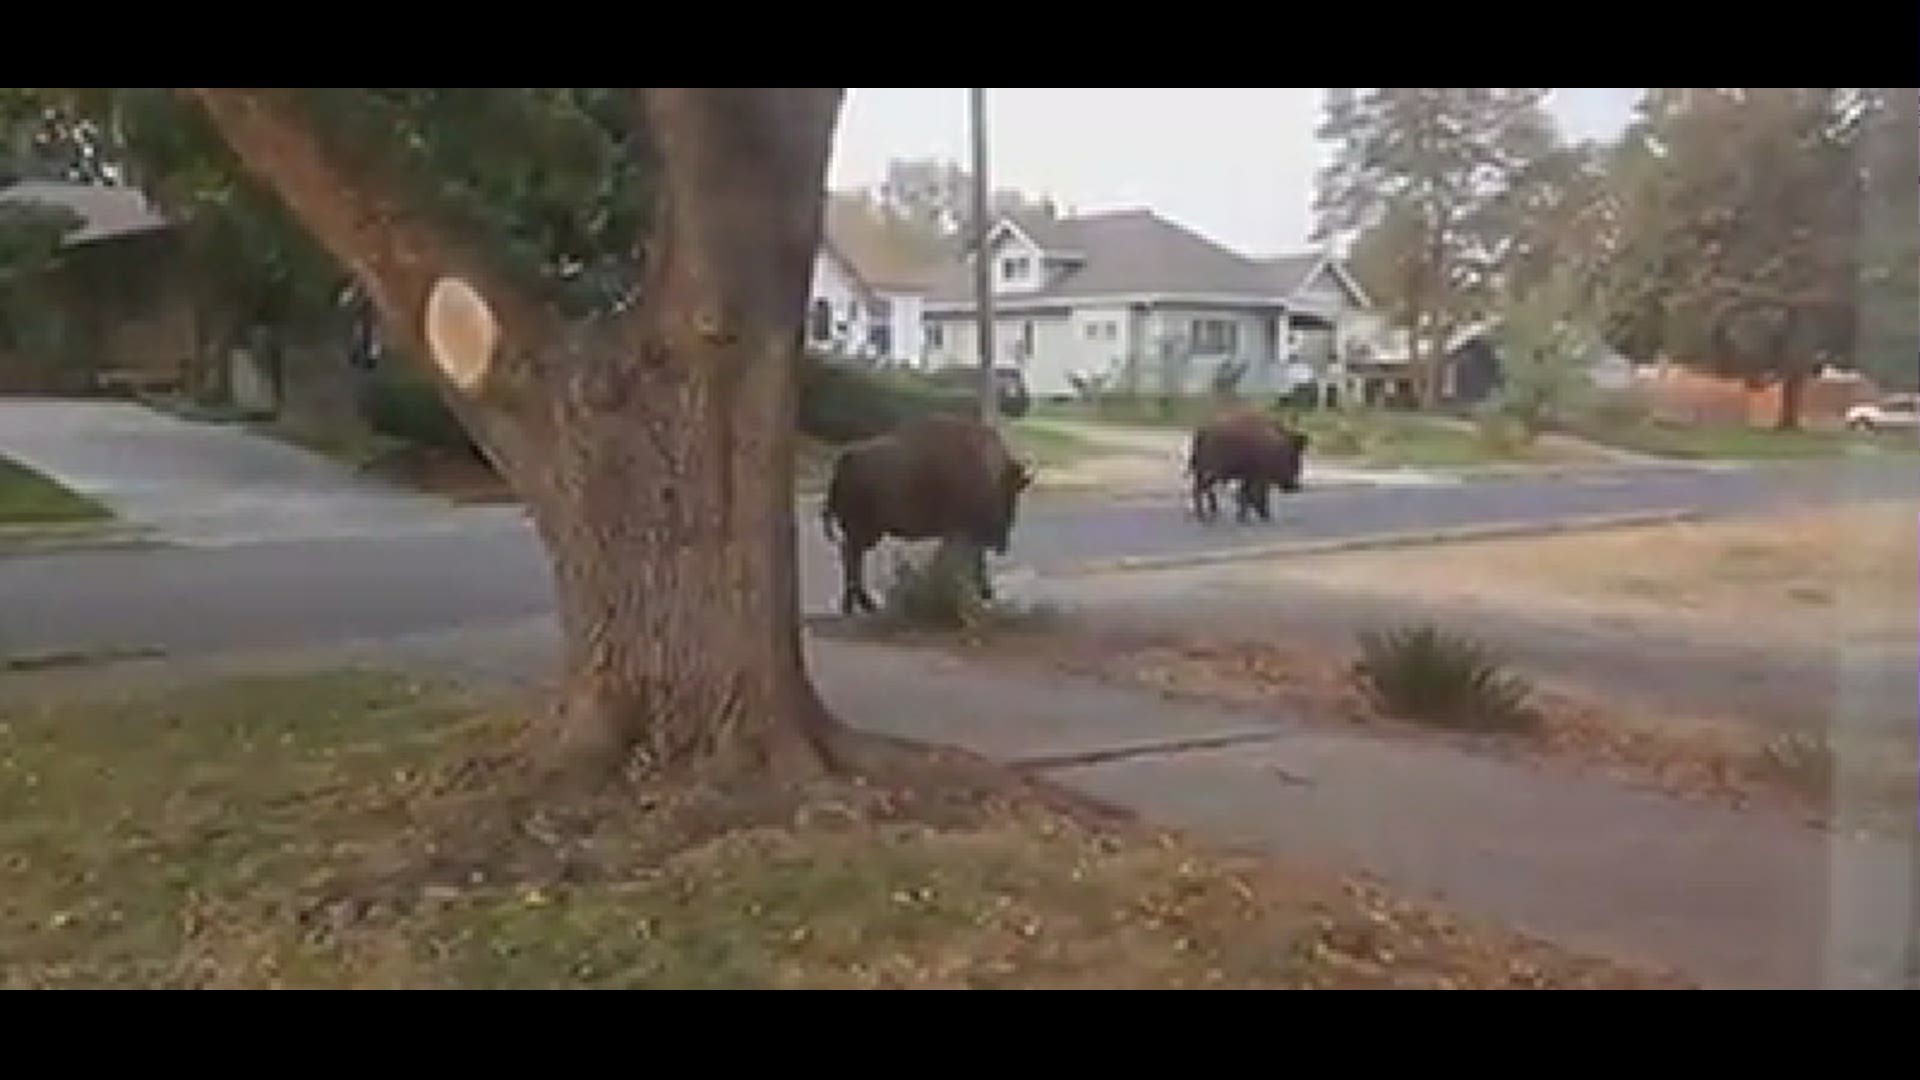 WARNING: This video contains profanity. A South Hill homeowner spotted two bison wandering through her neighborhood on Friday, Oct. 8. (Credit: Laura Cabe)